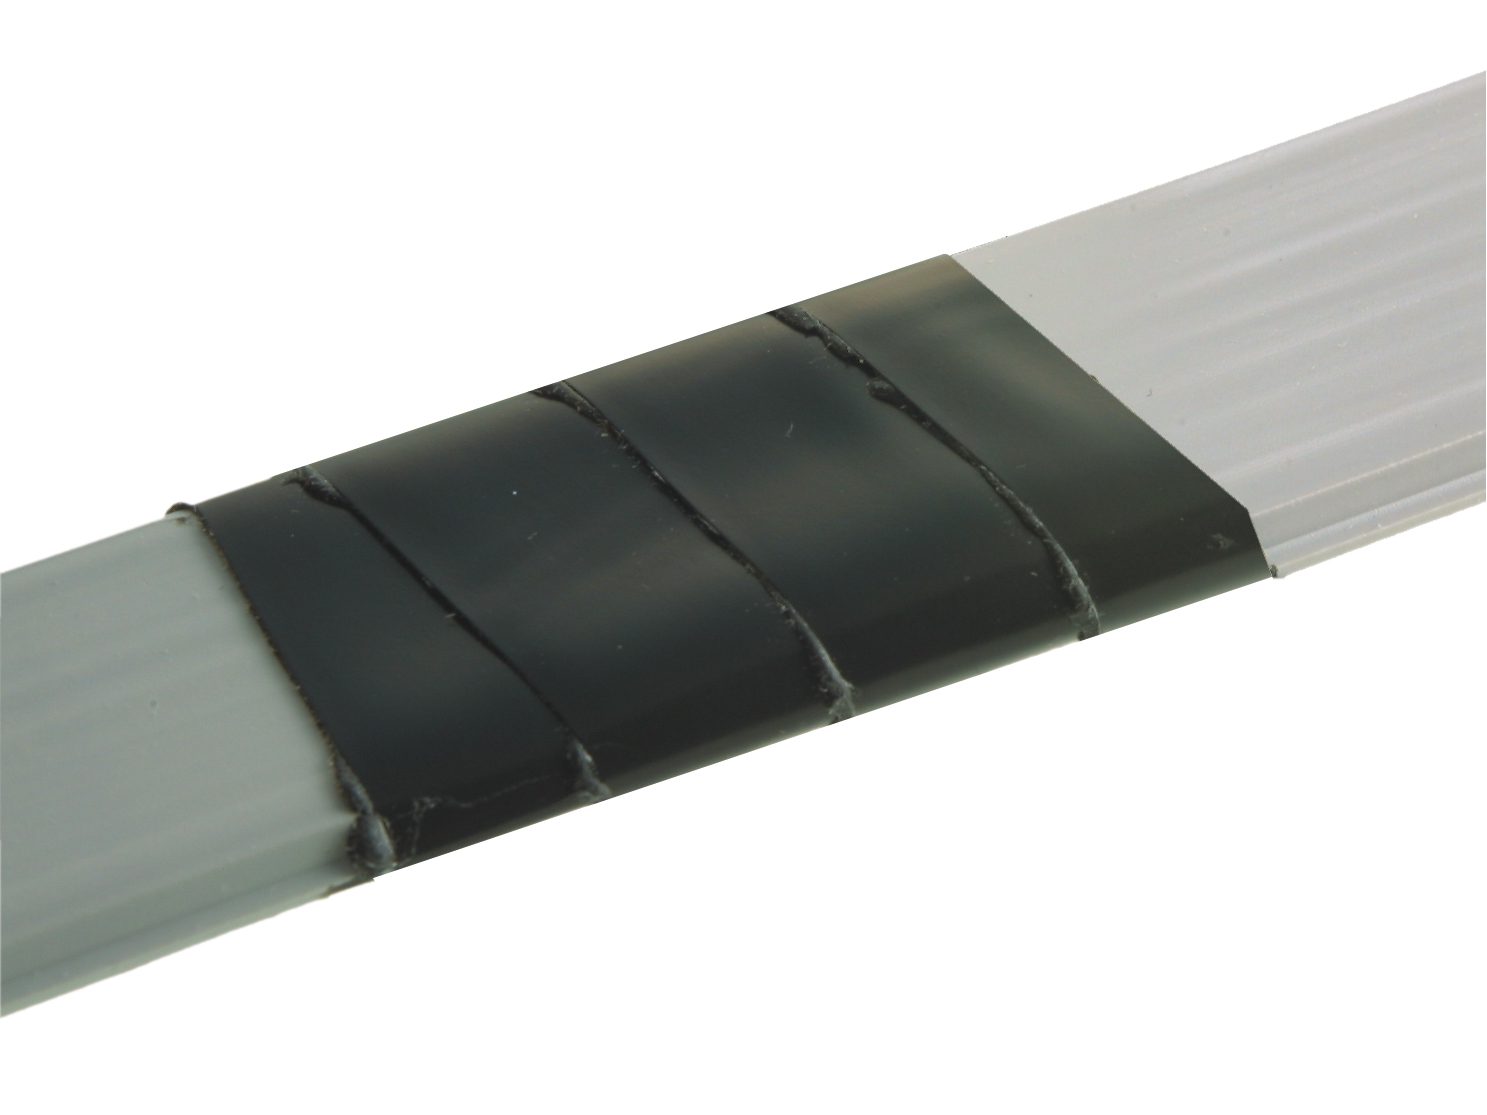 Insulating tape for flat cable